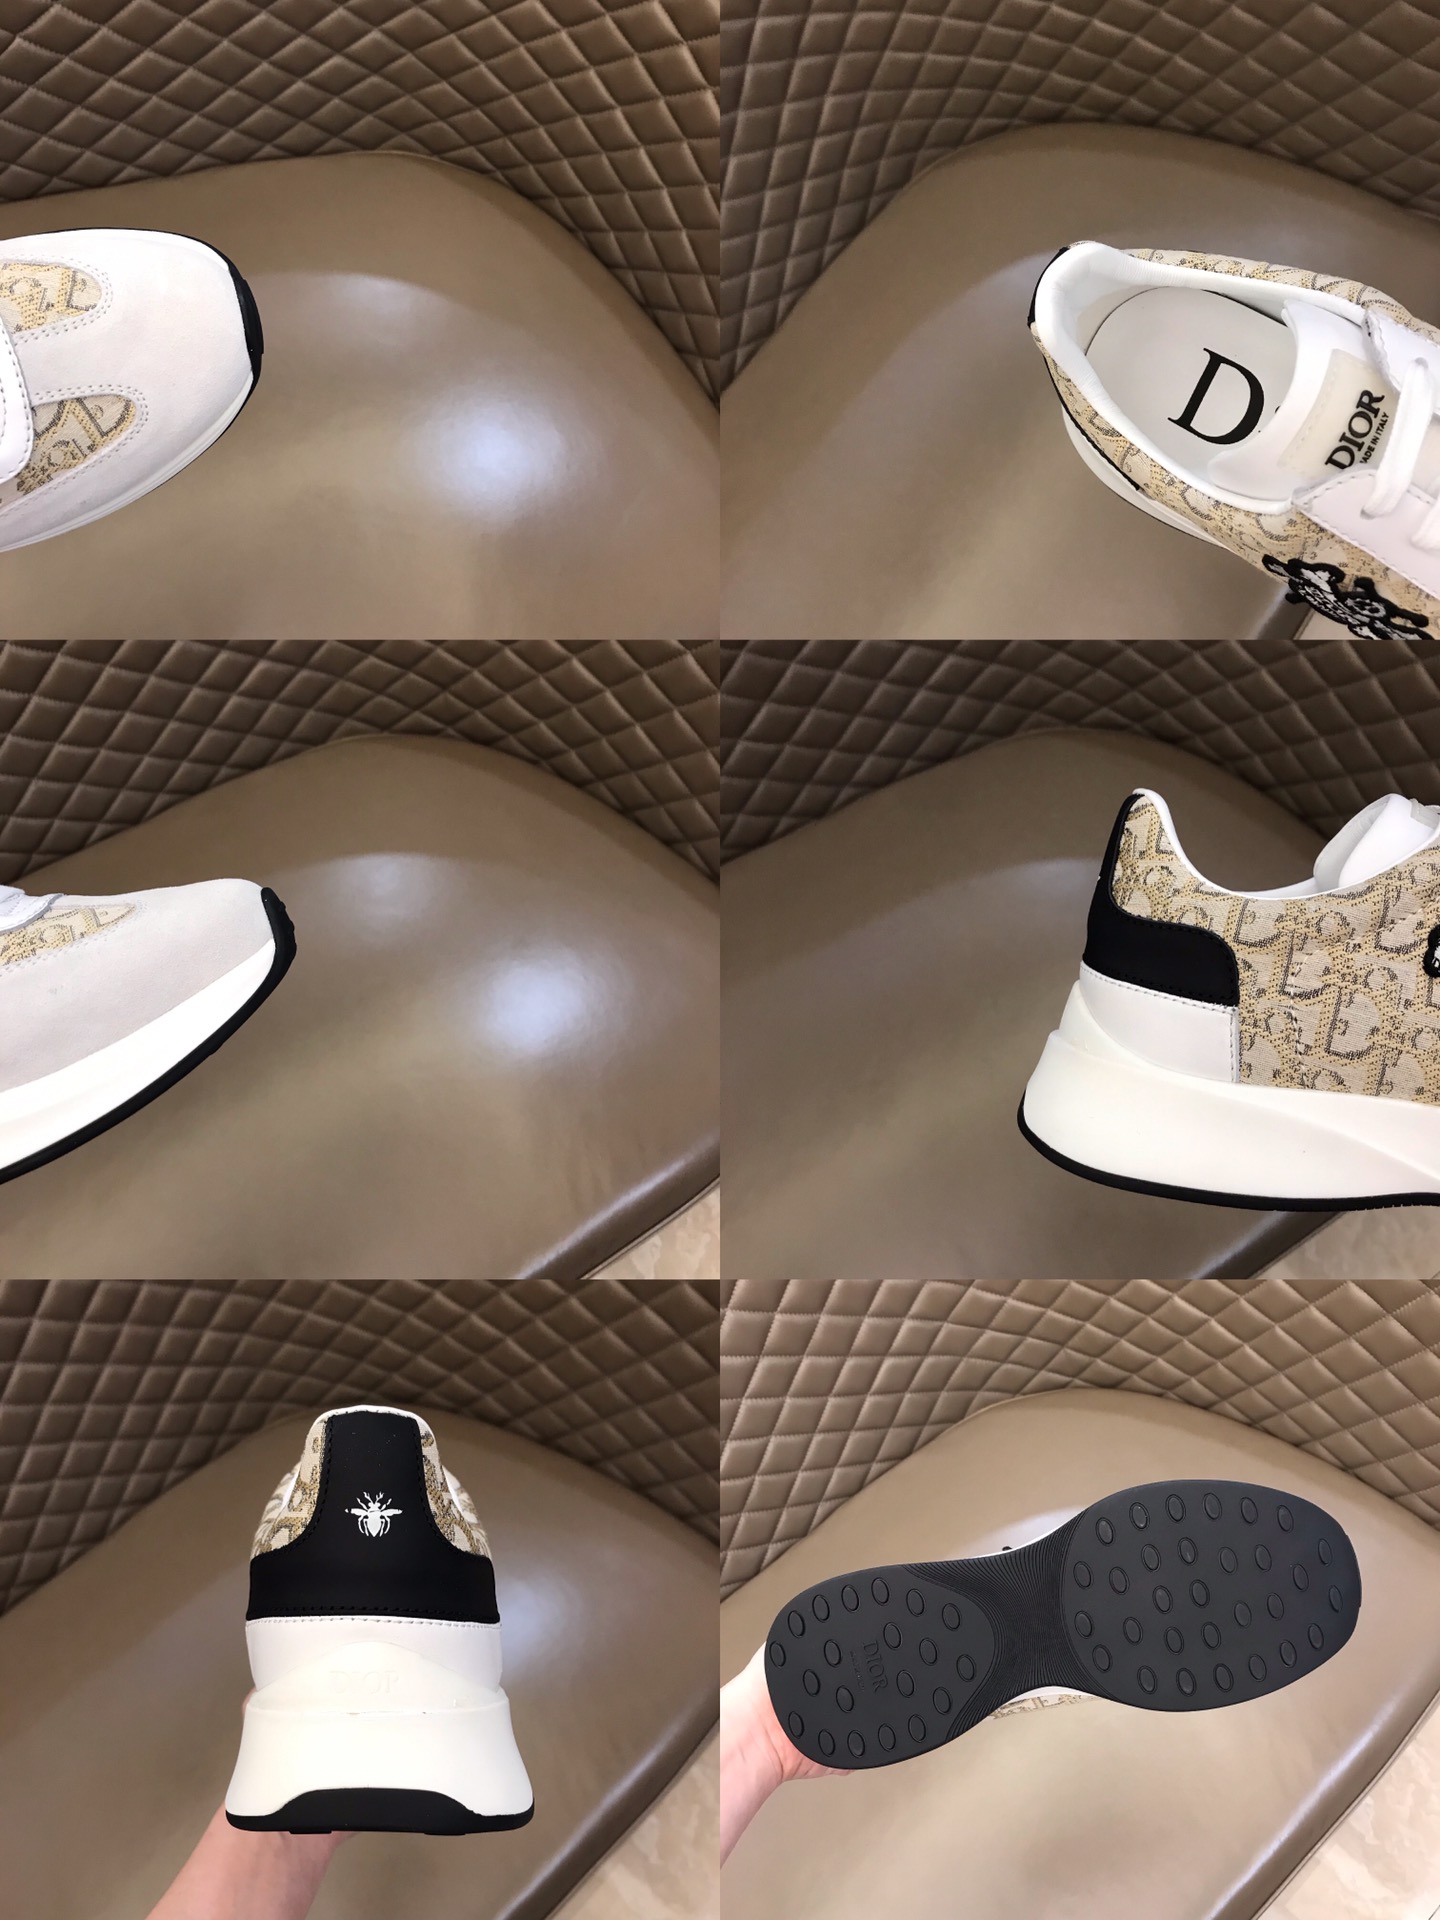 Dior Sneaker B01 in White with Brown Logo